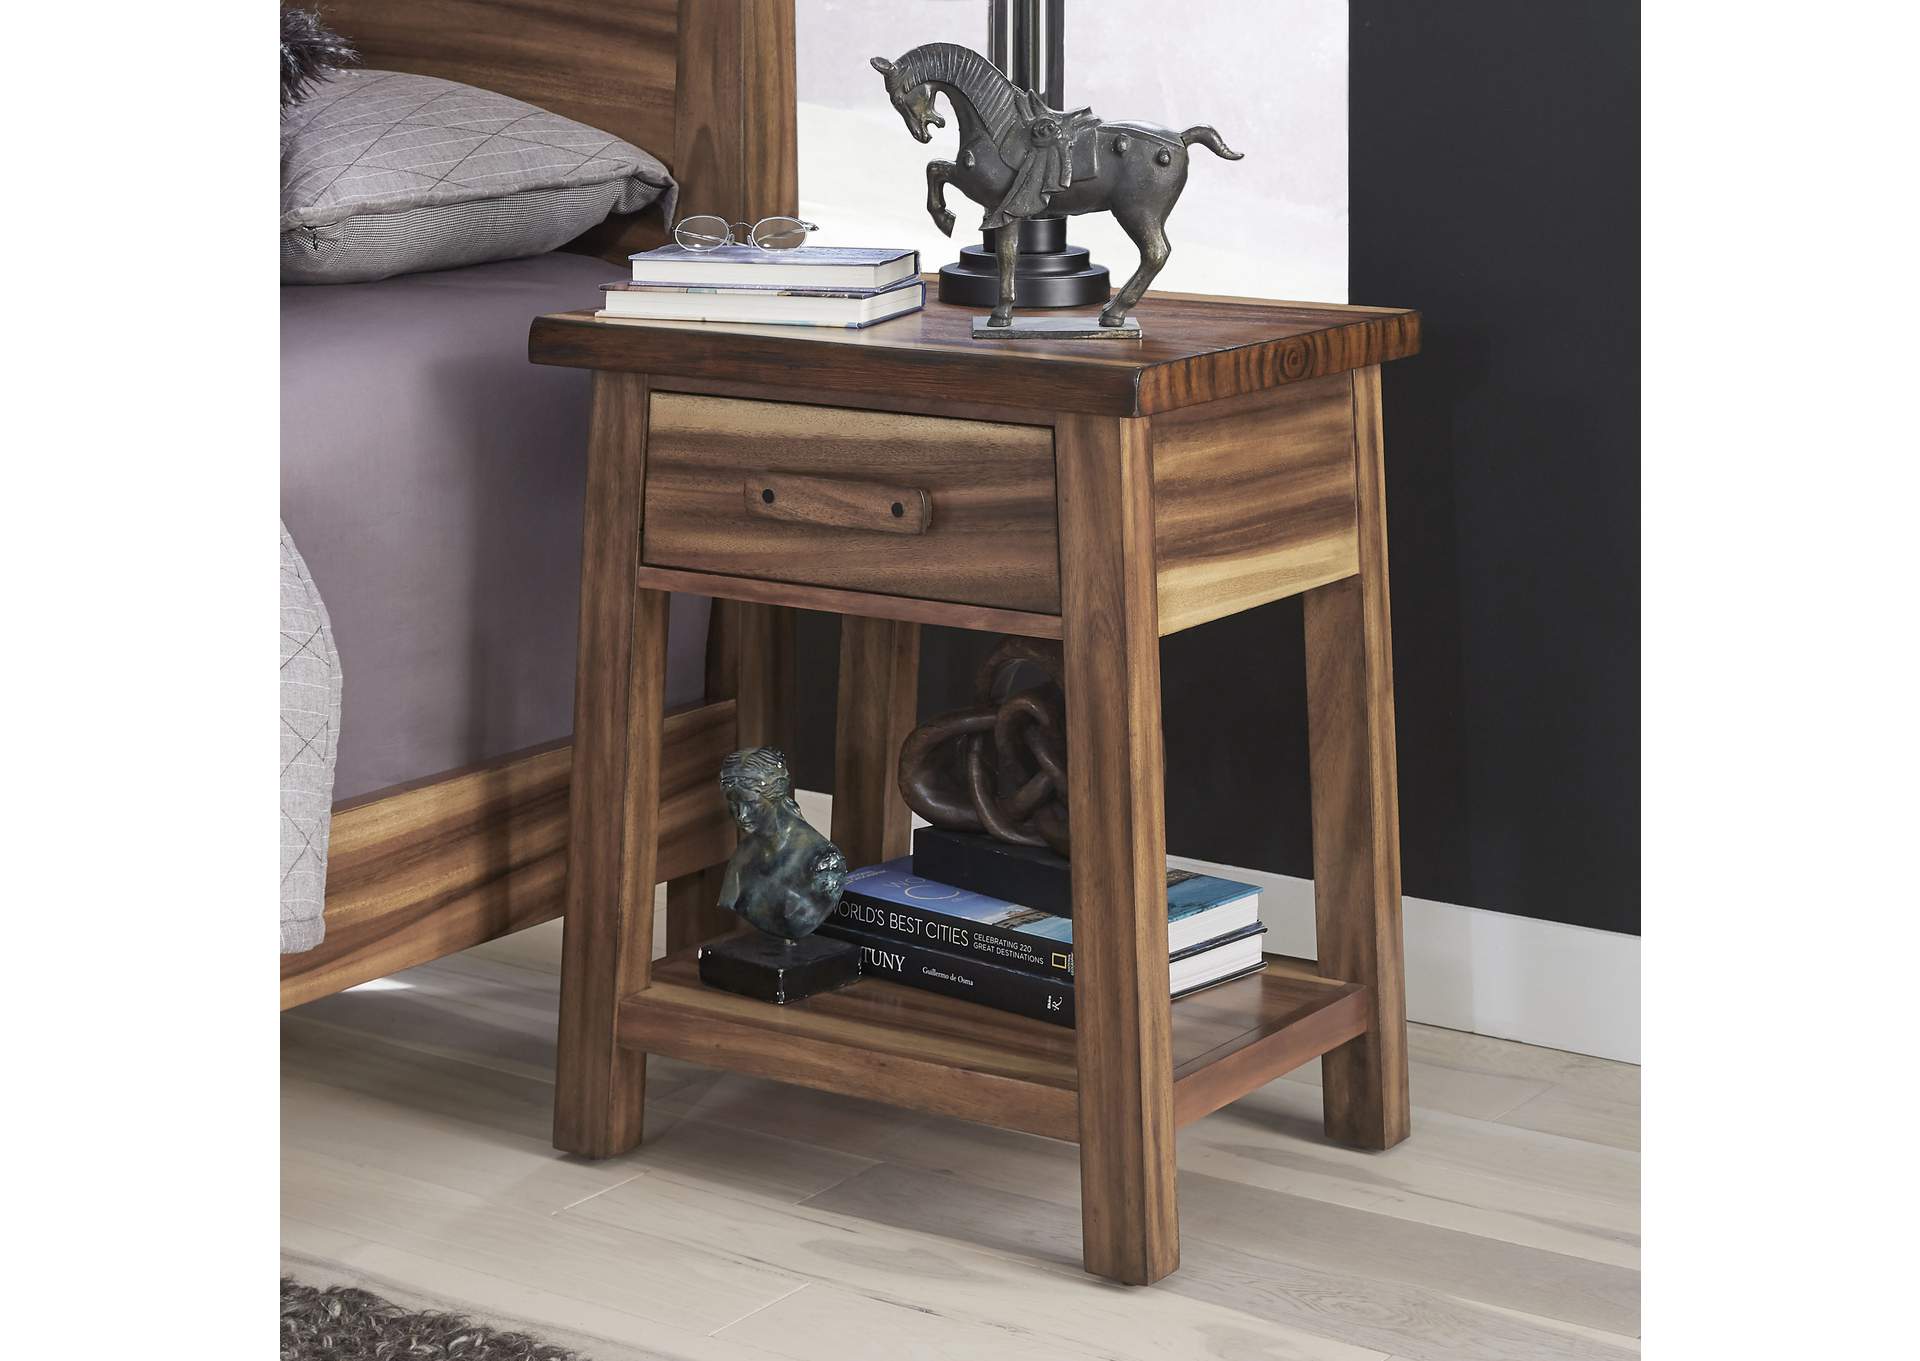 Forest Retreat Nightstand By Homestyles,Homestyles